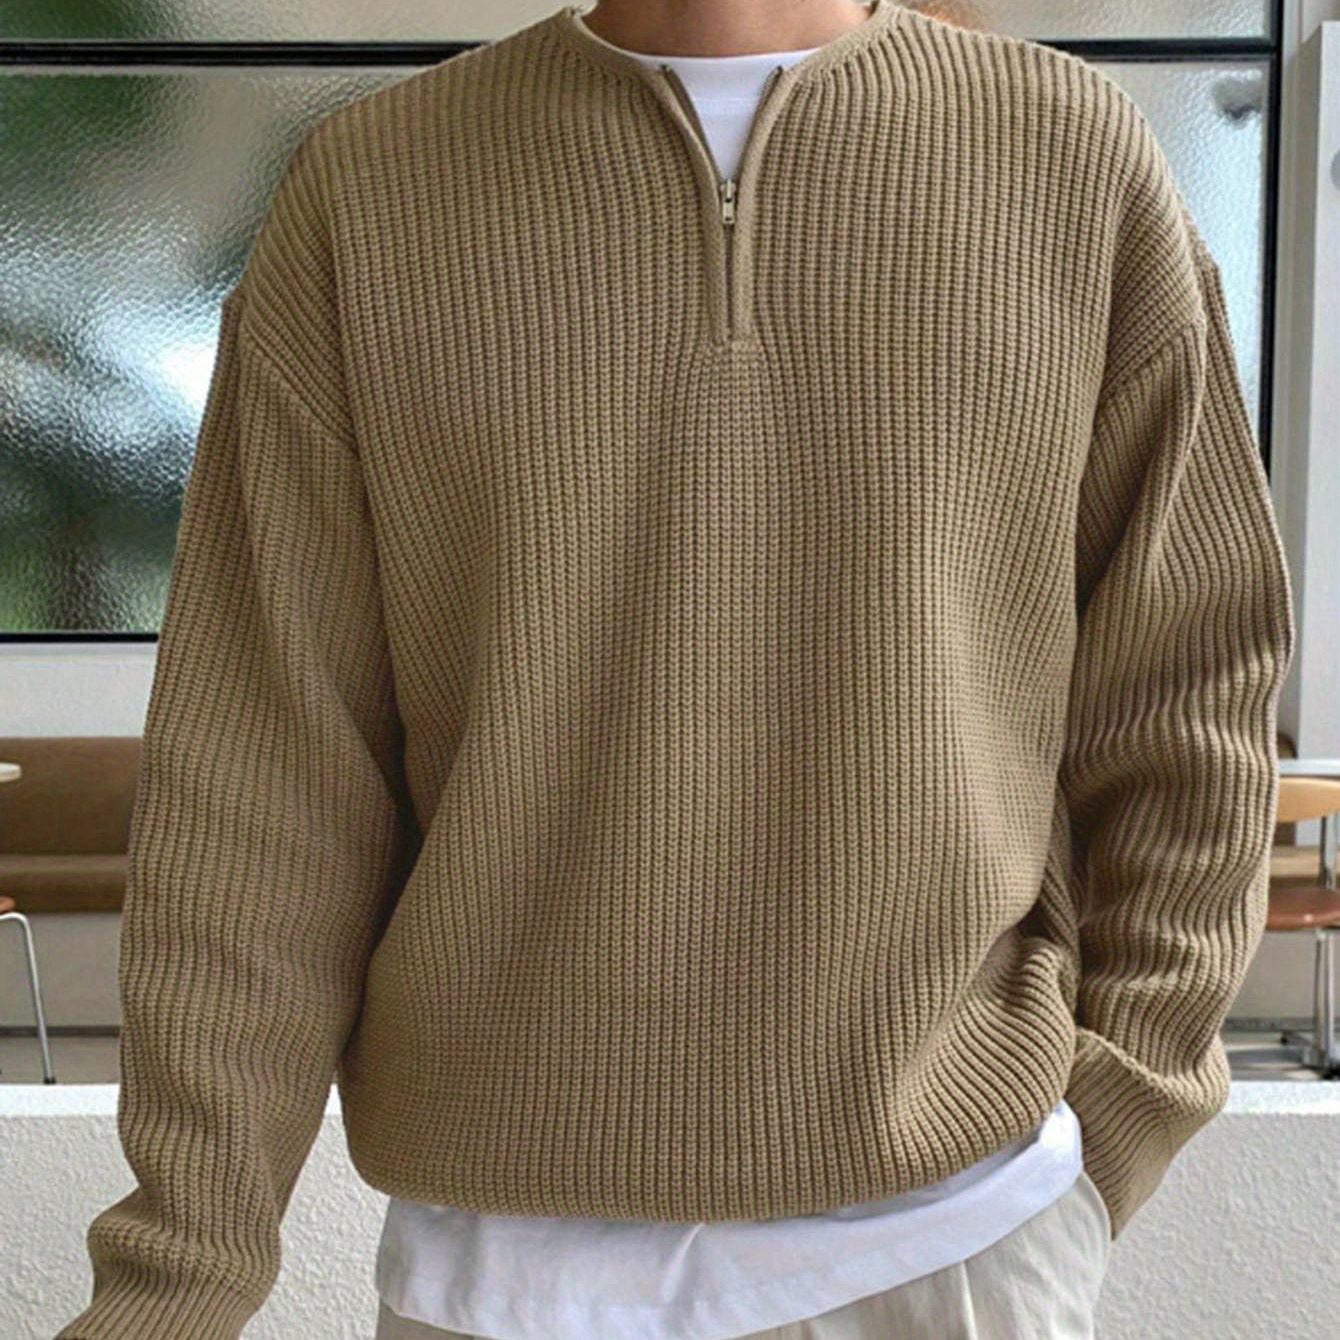 

Men's Loose Solid Striped Knitted Sweater, Casual Long Sleeve Half Zipper Top For Fall Winter